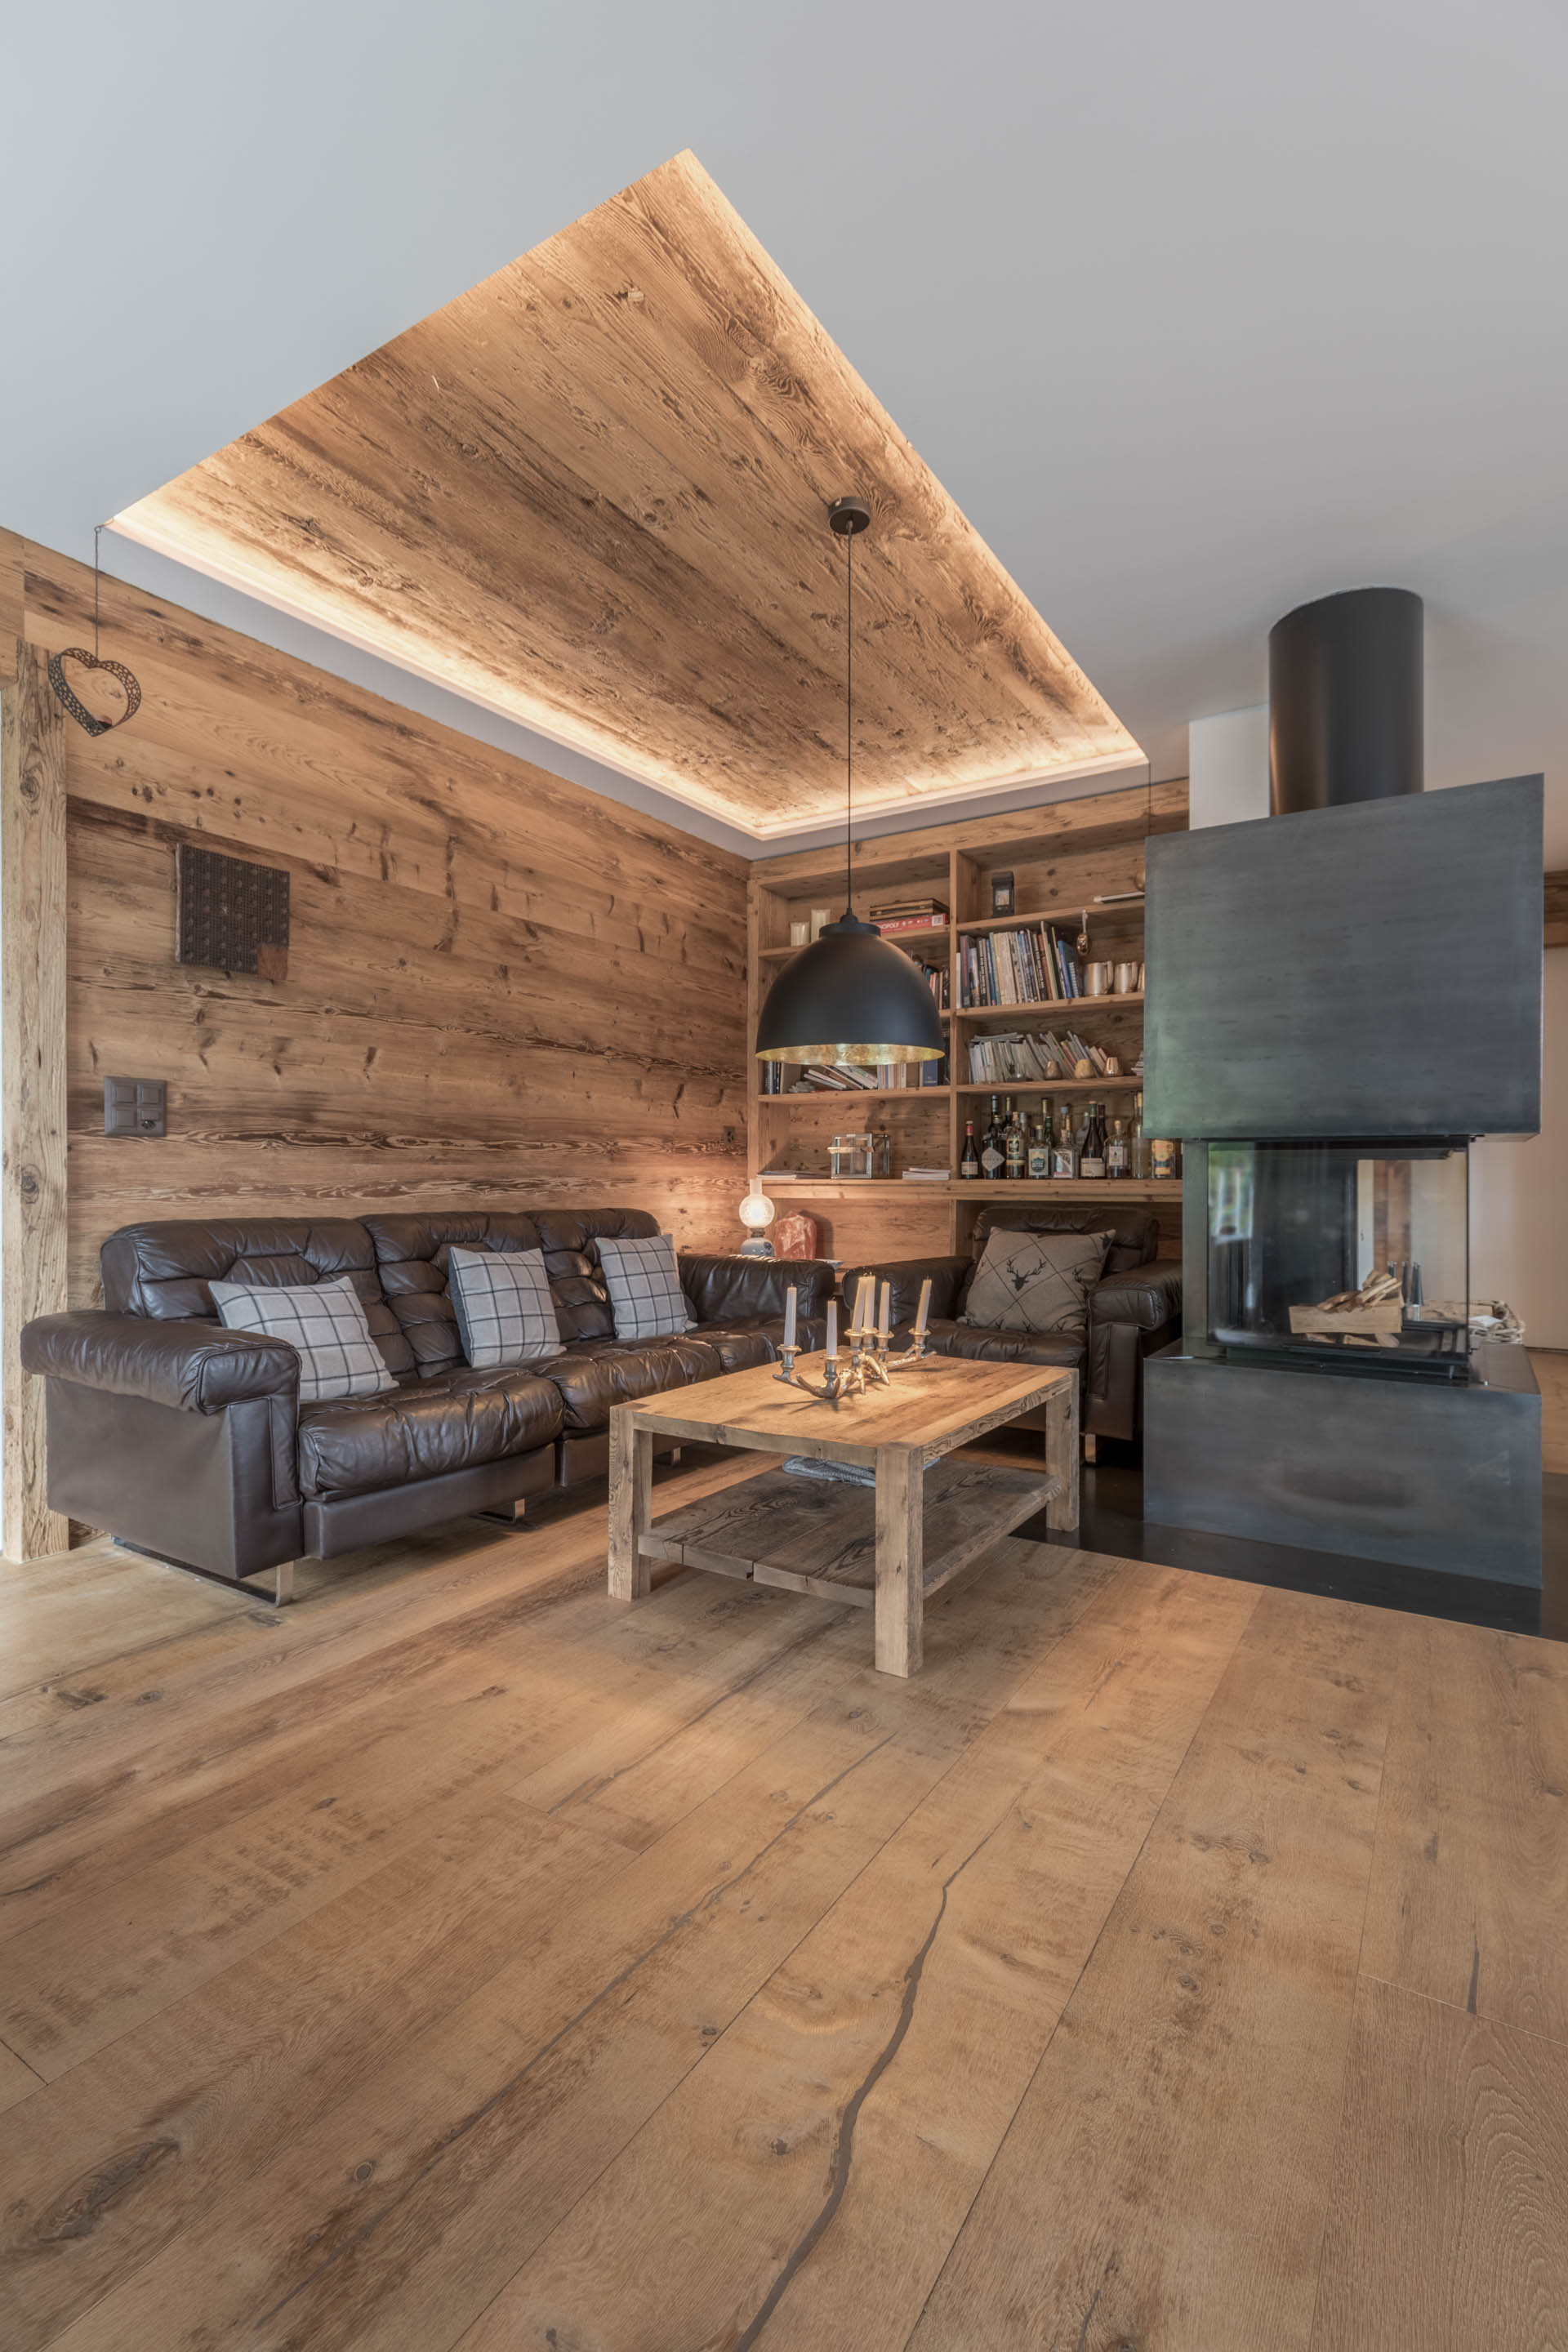 PRIVATE ALPINE STYLE APPARTMENT |  Parquet collection "Fuerstliche Maxi-Diele" steamed oak air dried surface color 009 as well as 3-layer panels reclaimed spruce/fir/pine type 1G brushed and 3-layer wall panels reclaimed spruce/fir/pine type 2B chopped slightly brushed